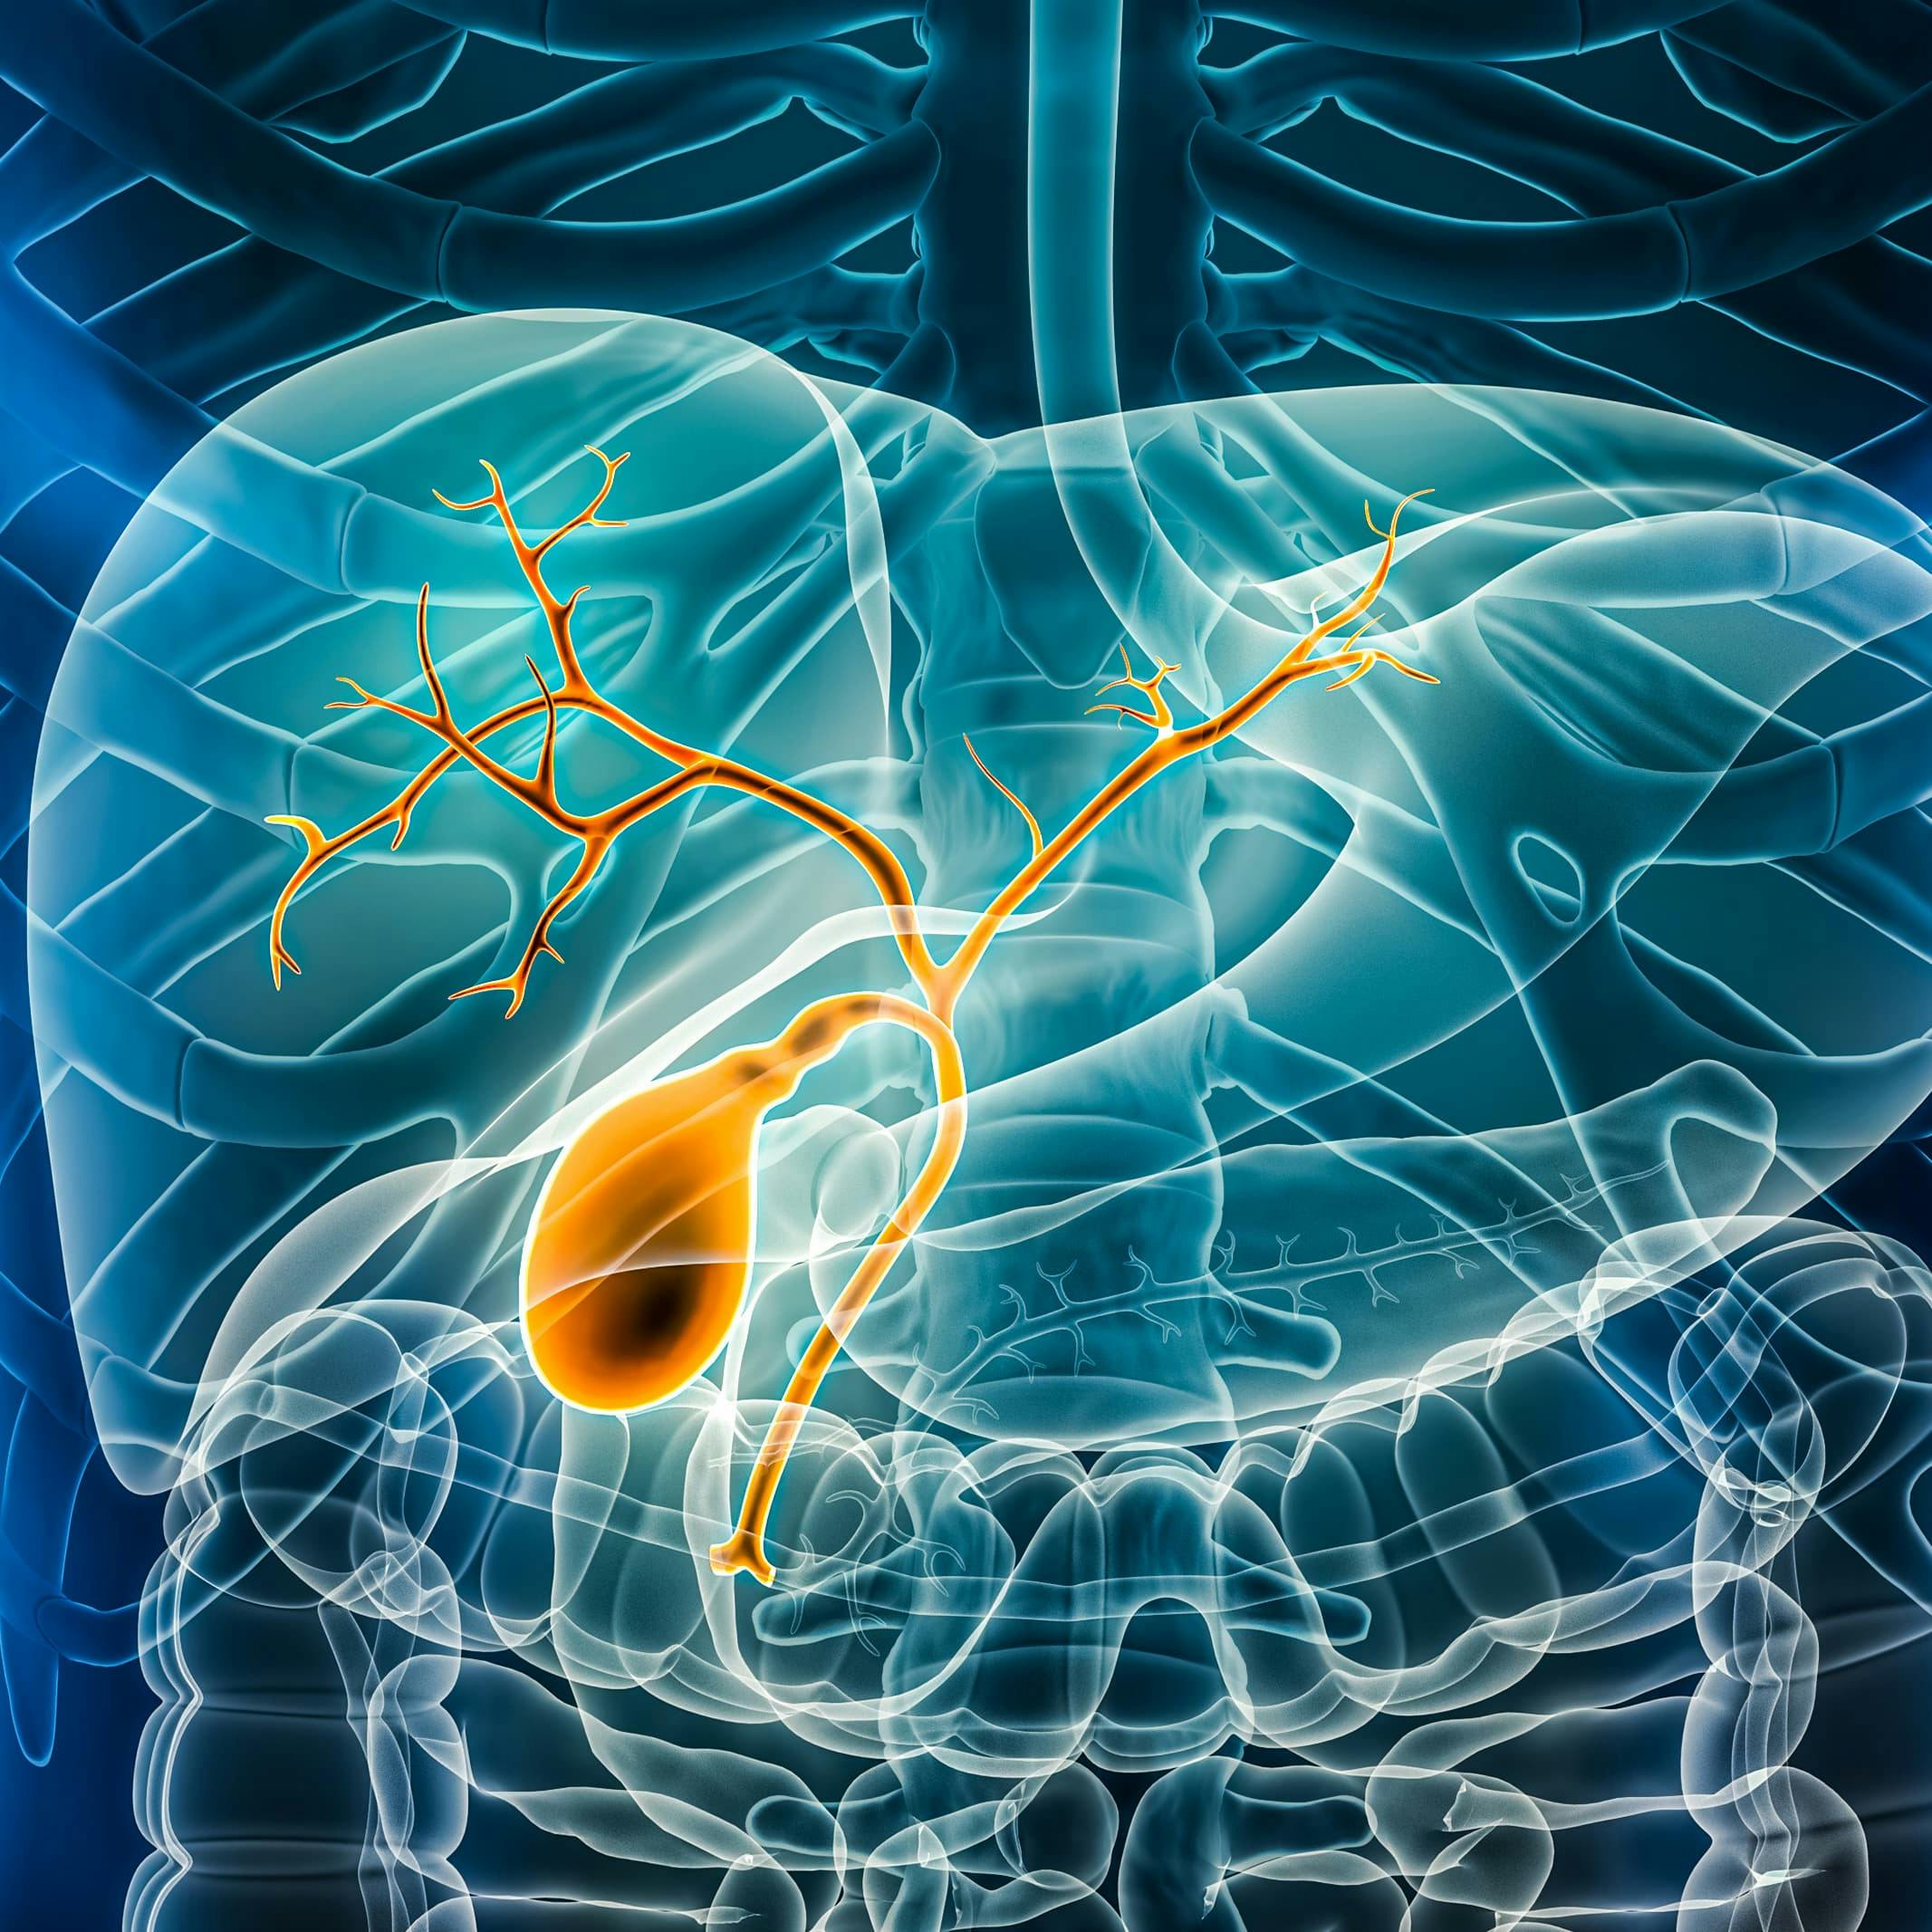 "Zanidatamab demonstrated antitumor activity, including rapid and durable responses in patients with treatment-refractory HER2-positive biliary tract cancer," according to an expert from the University of Texas MD Anderson Cancer Center.